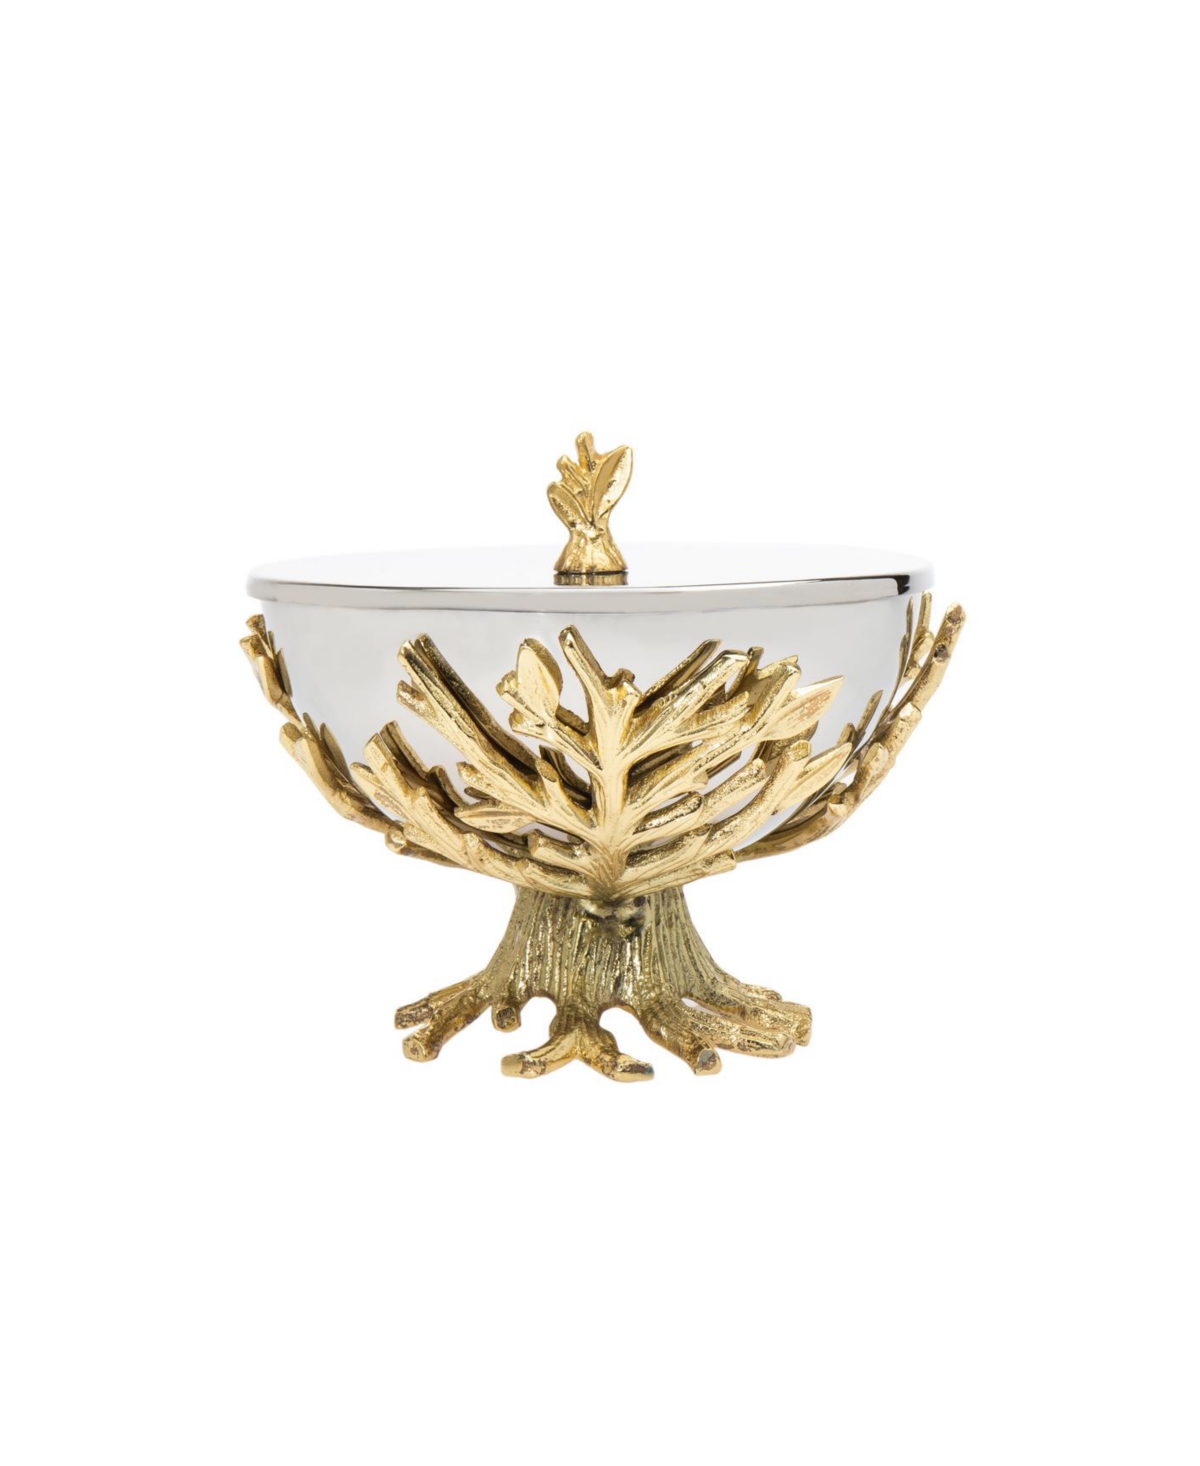 Branch Stand with Covered Bowl Set, 2 Piece - Gold-Tone